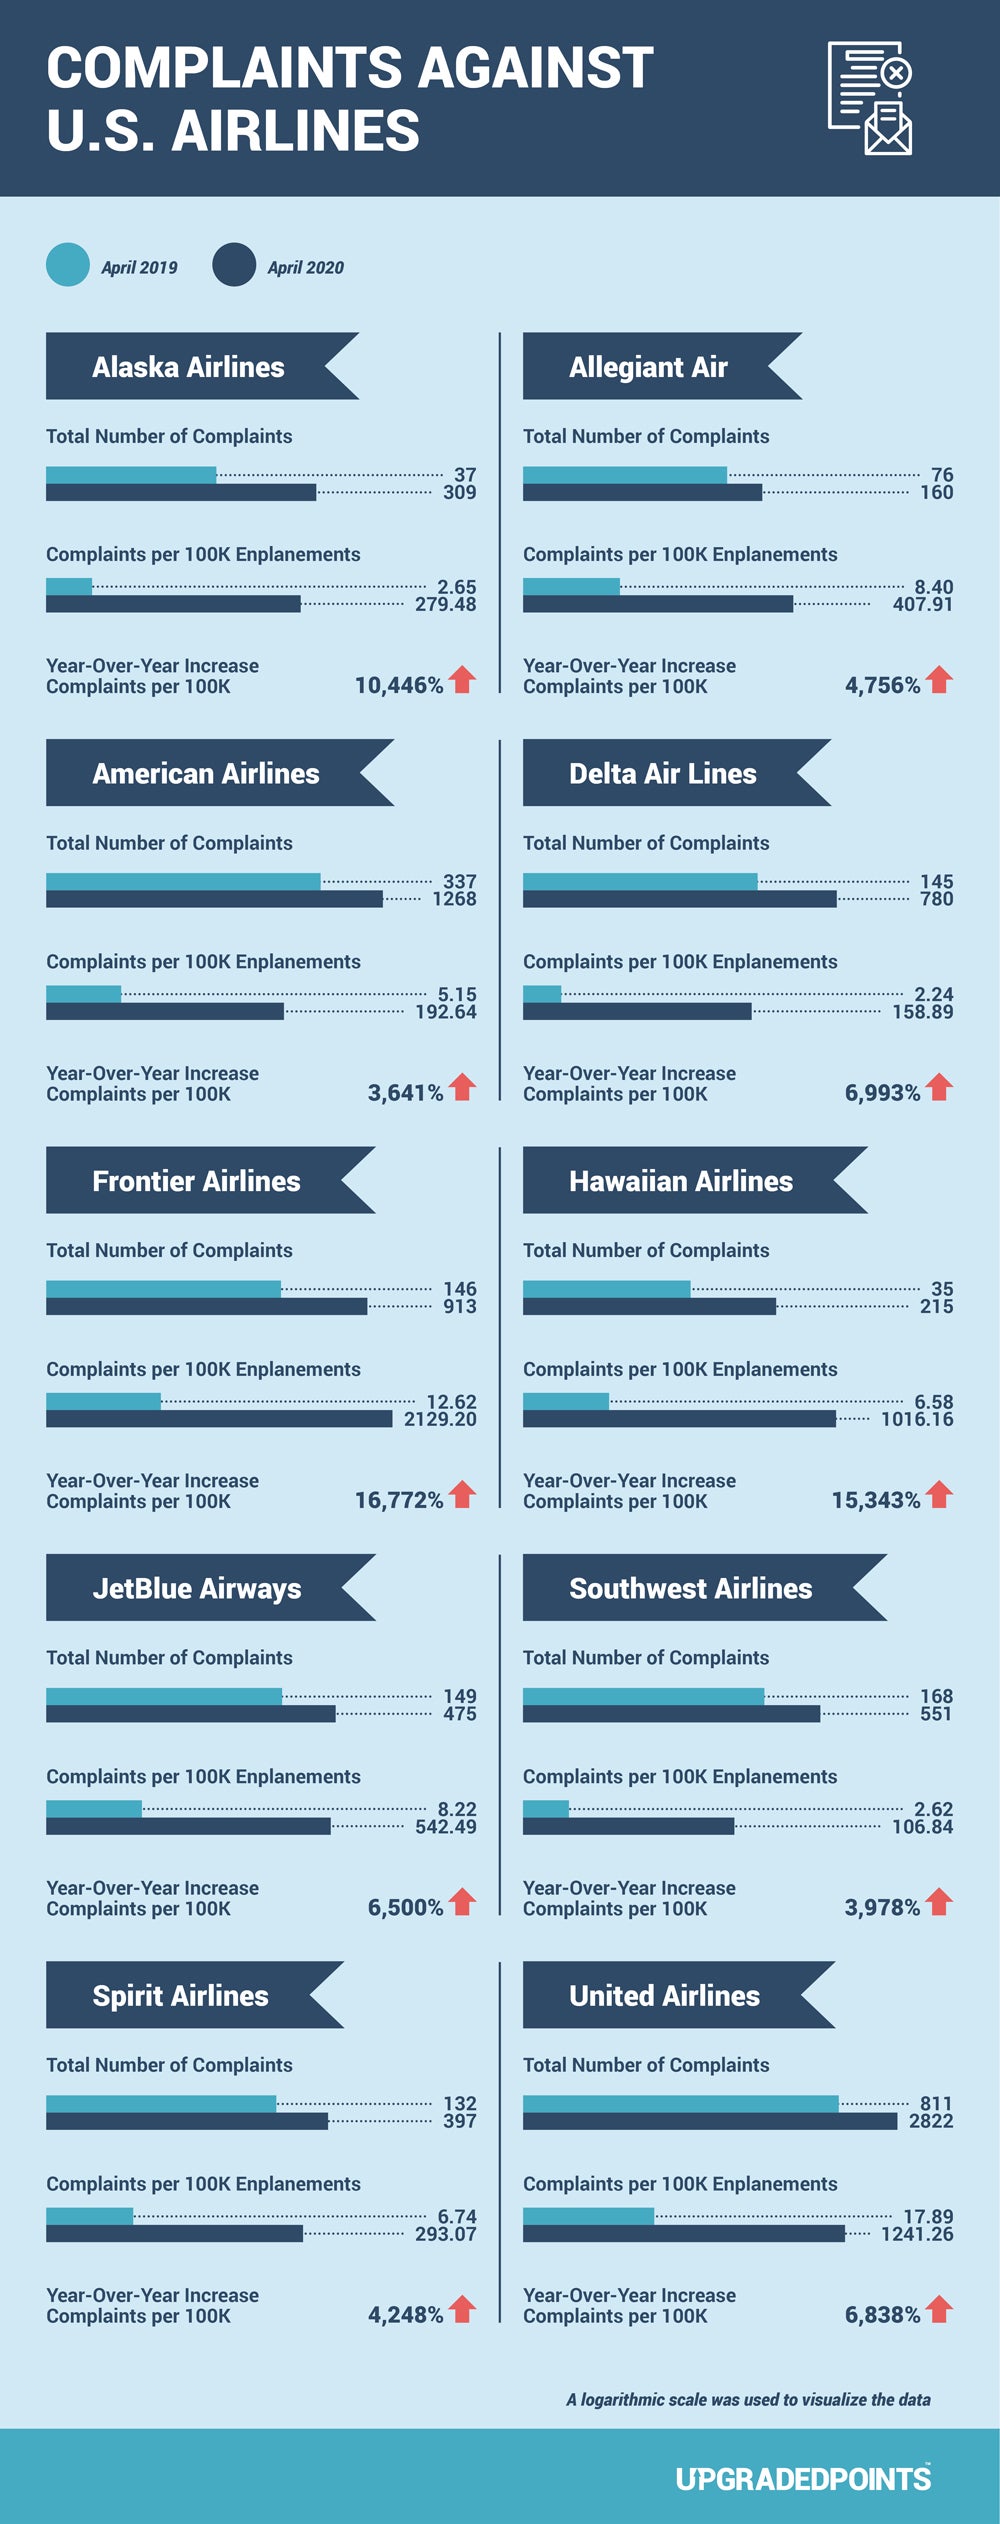 Airline complaints by category for US airlines